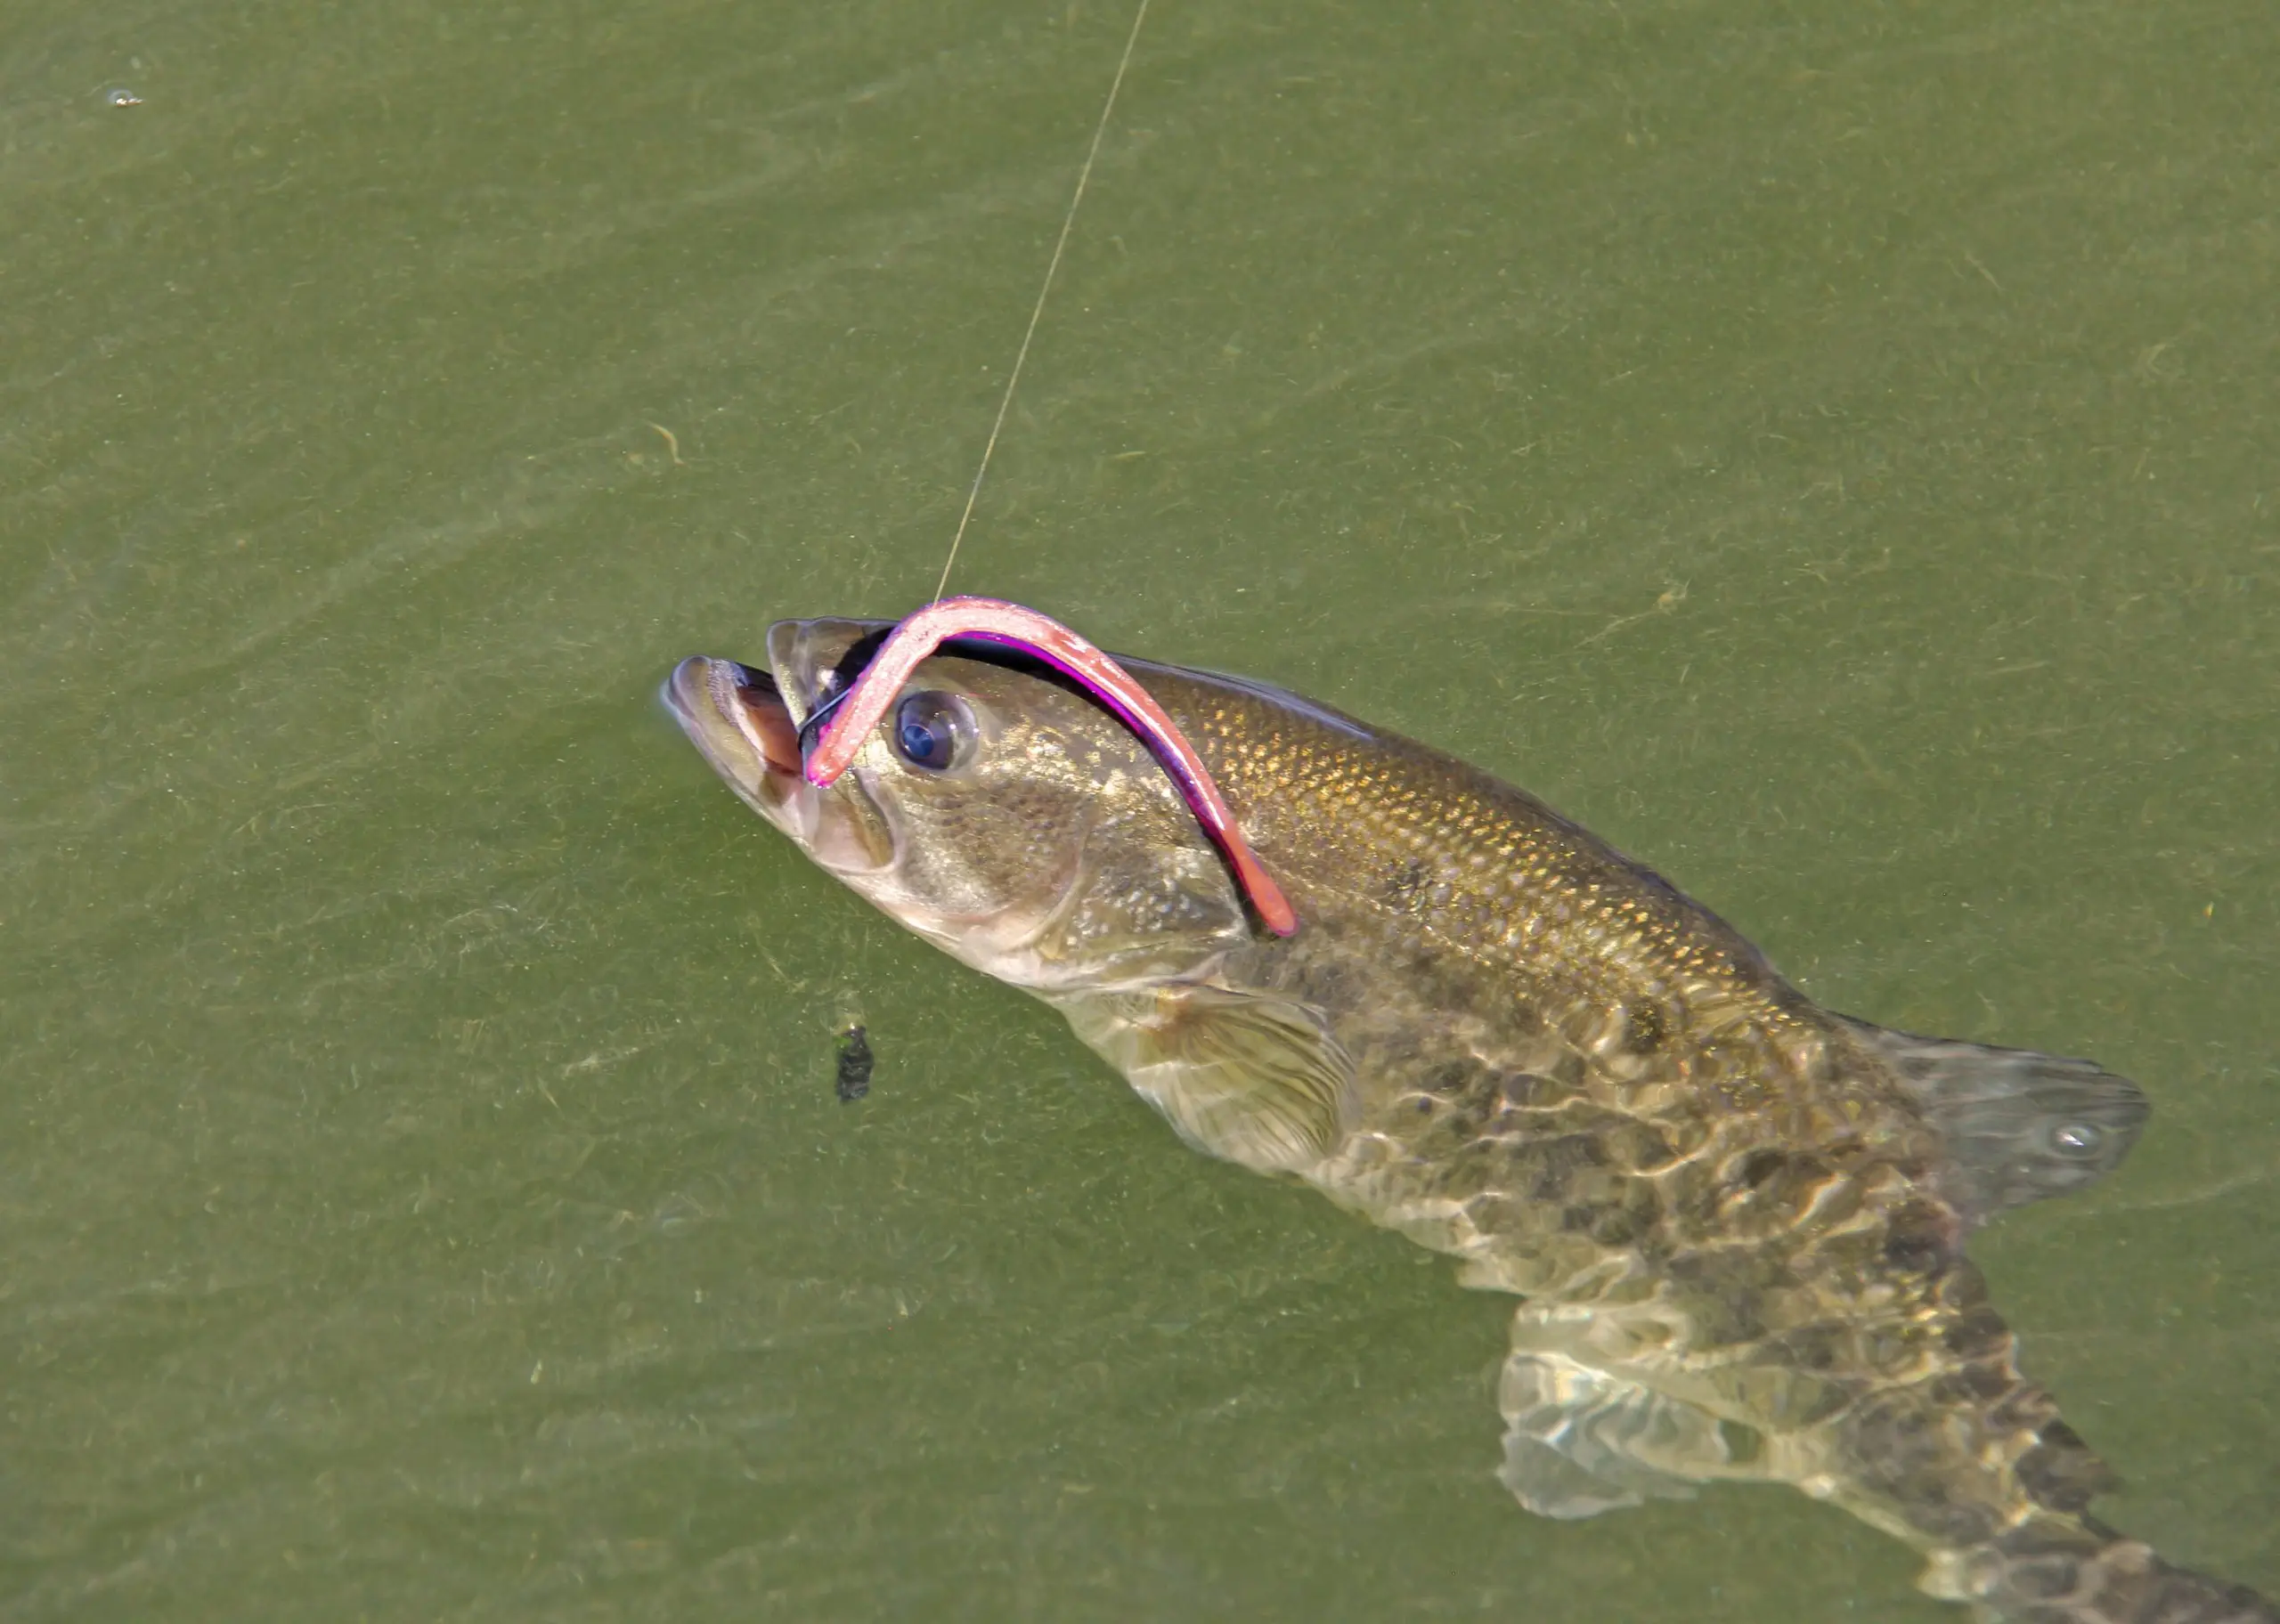 American ROBOWORM Straight Tail Imports Noodles and Sticks To Catch Soft  Bait From Texas Lure.